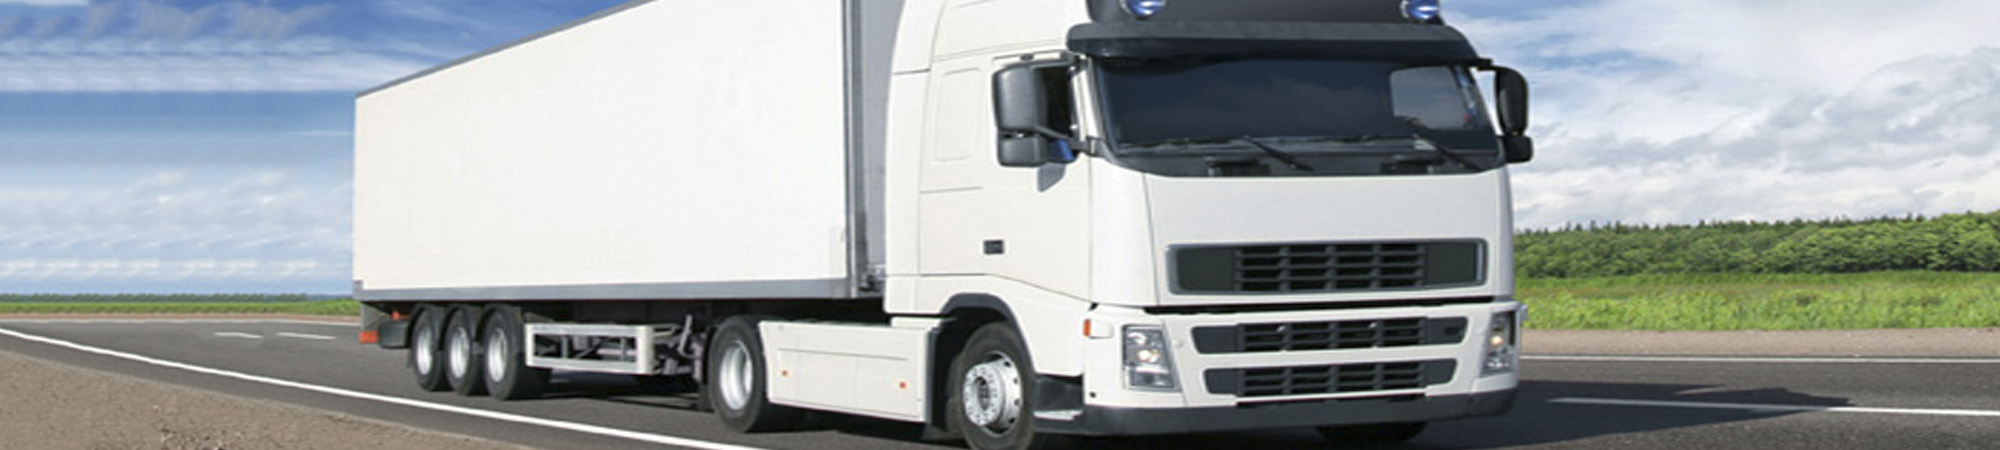 camion-def